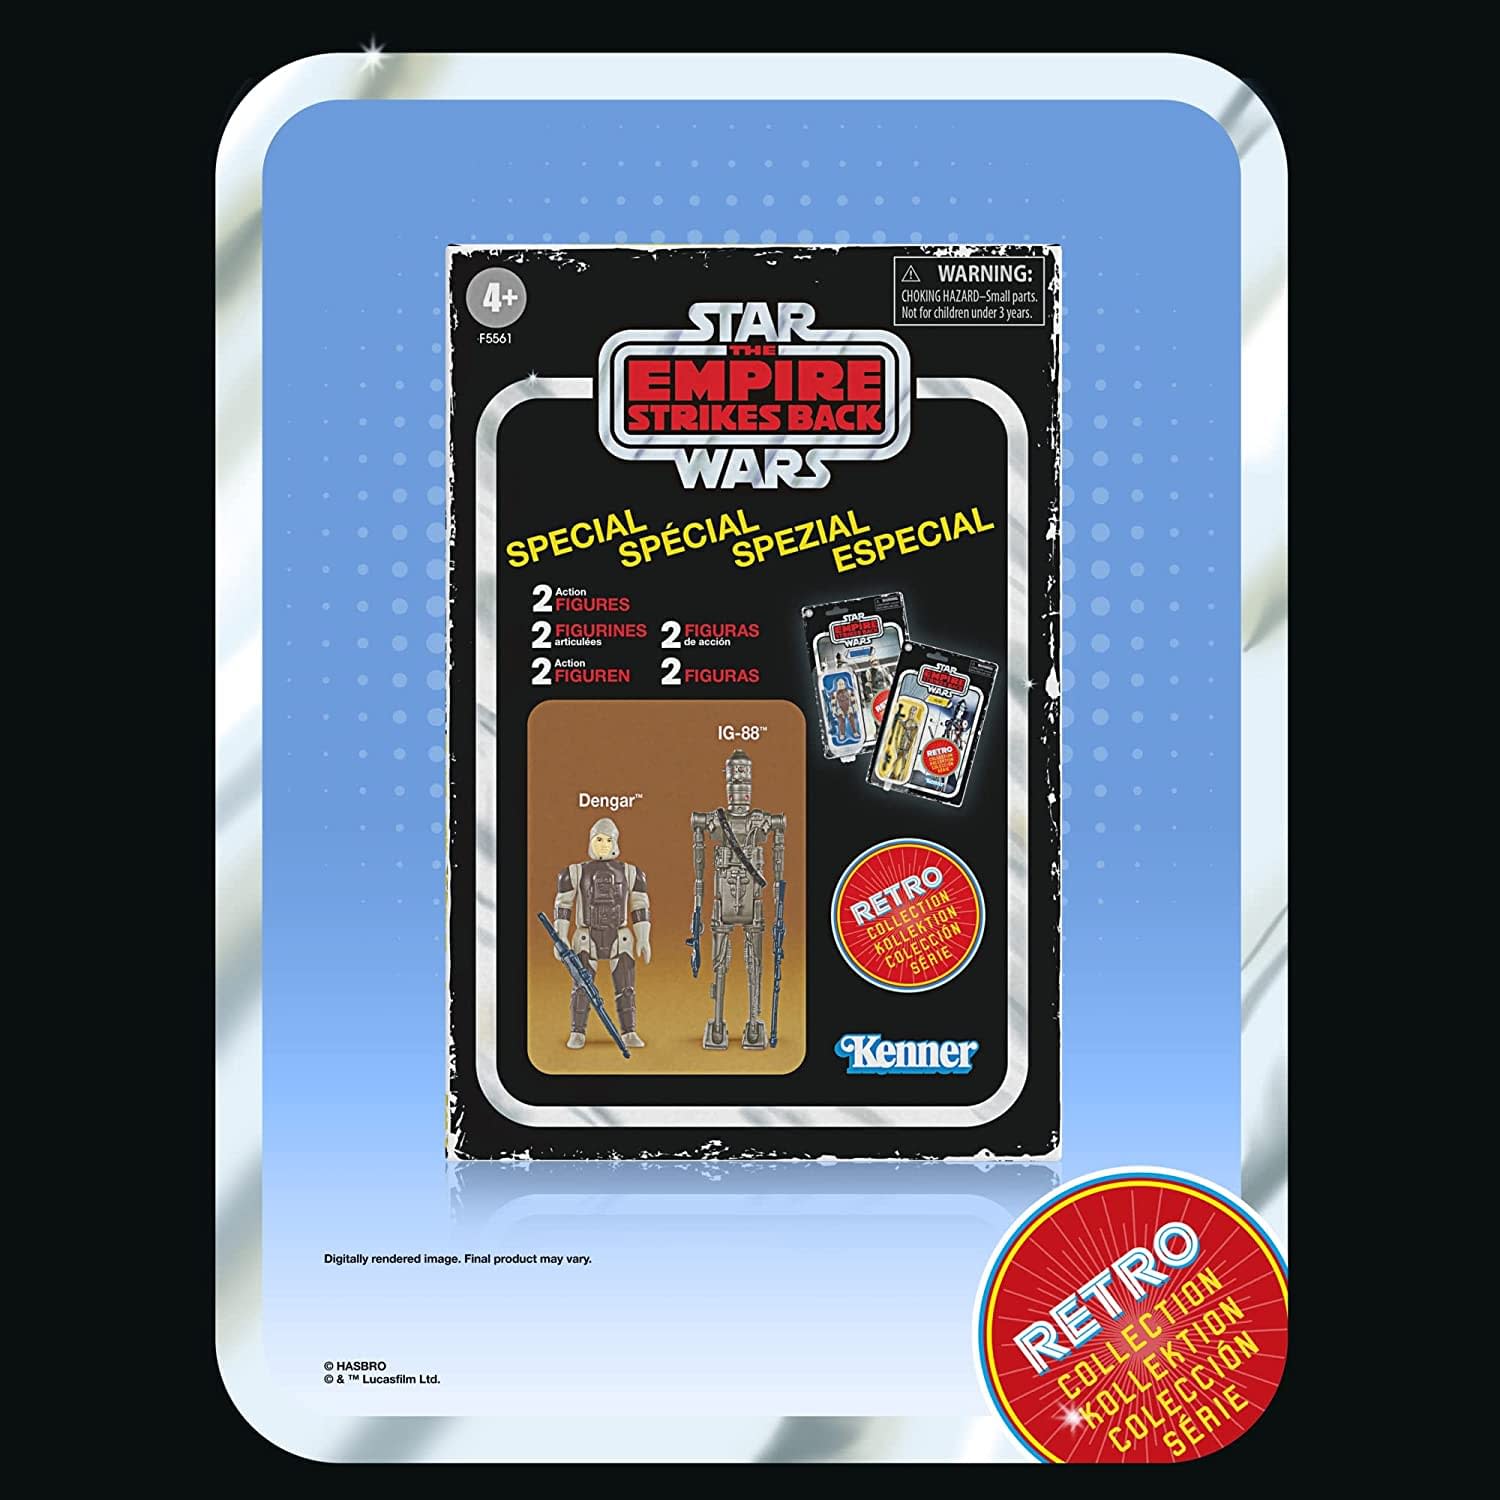 Star Wars Retro Collection Special Bounty Hunters 2-Pack Dengar & IG-88 Toys 3.75-Inch-Scale Star Wars Exclusive ,F5561 The Empire Strikes Back Figures 